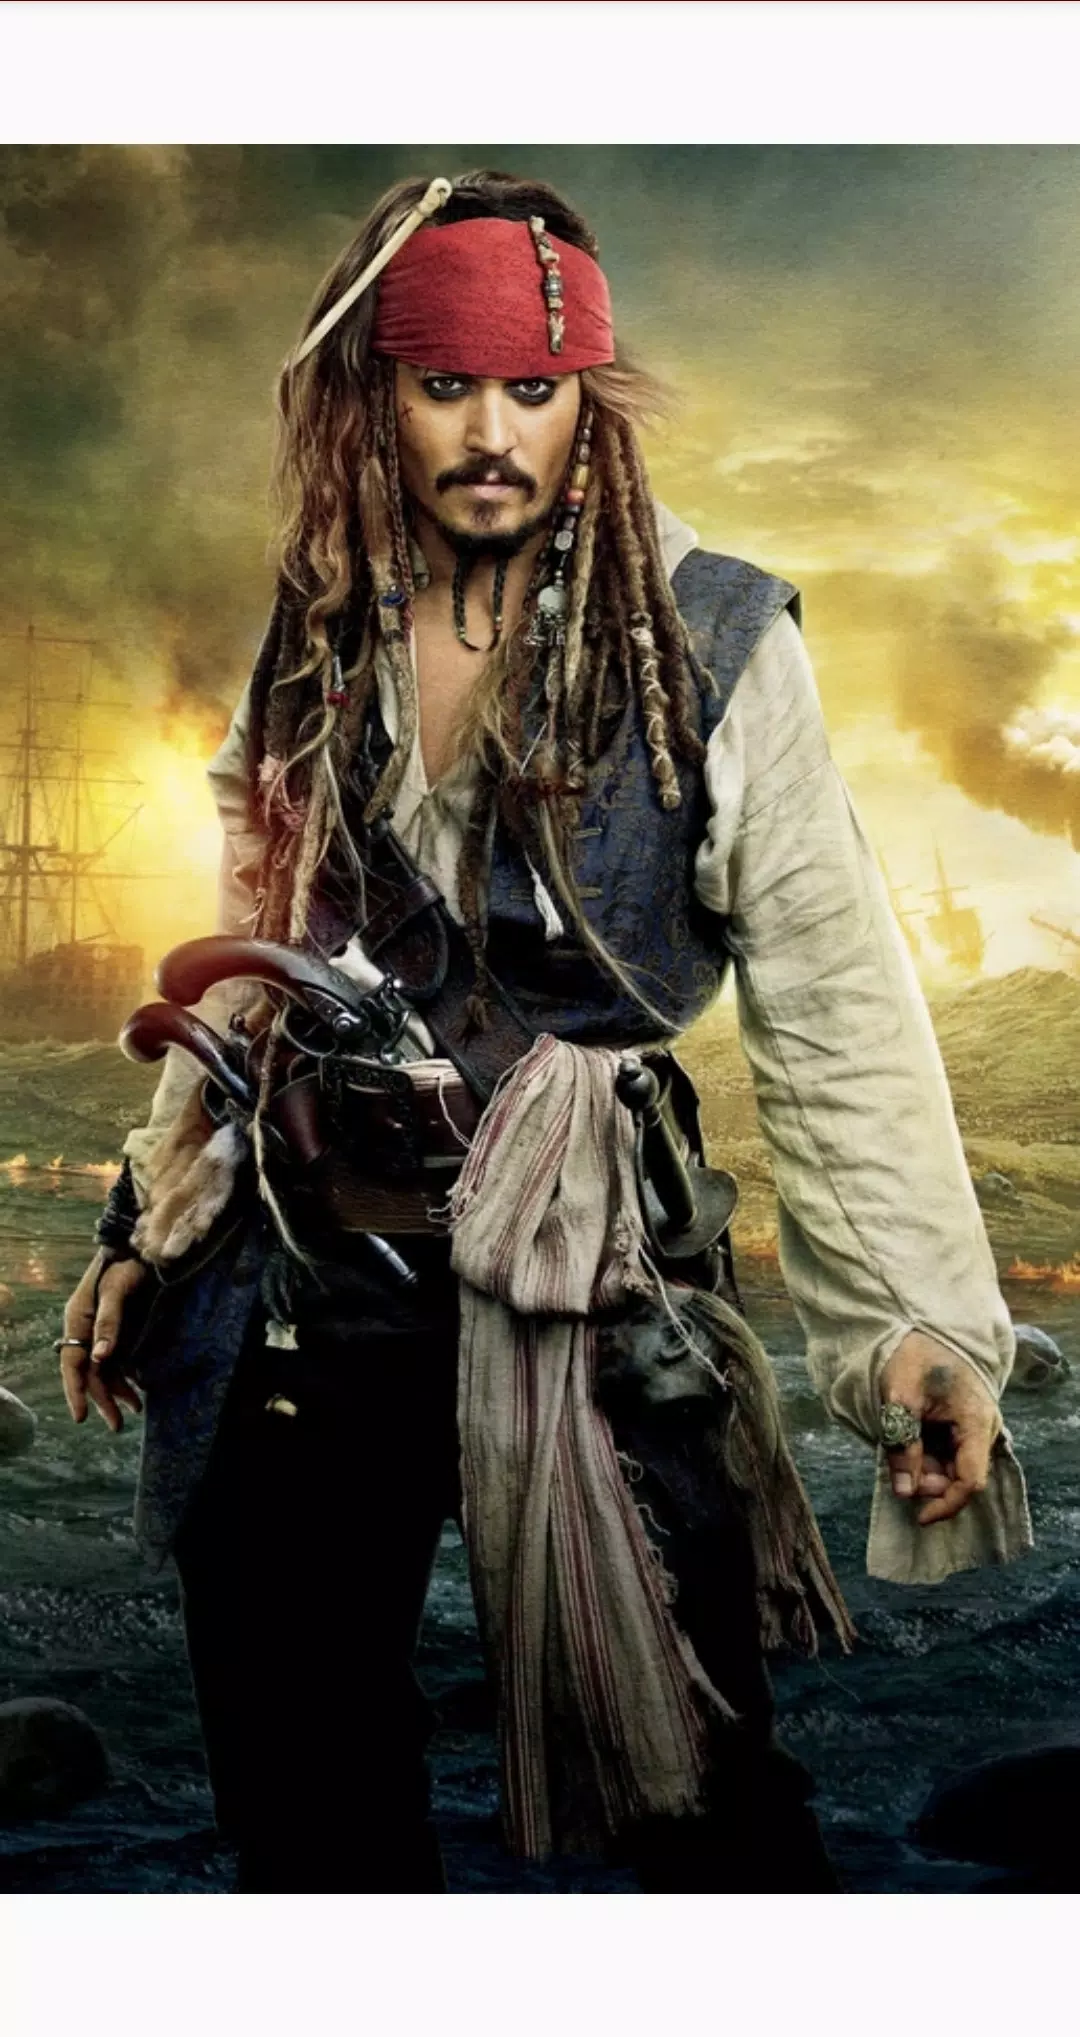 jack sparrow wallpaper hd for Android - APK Download